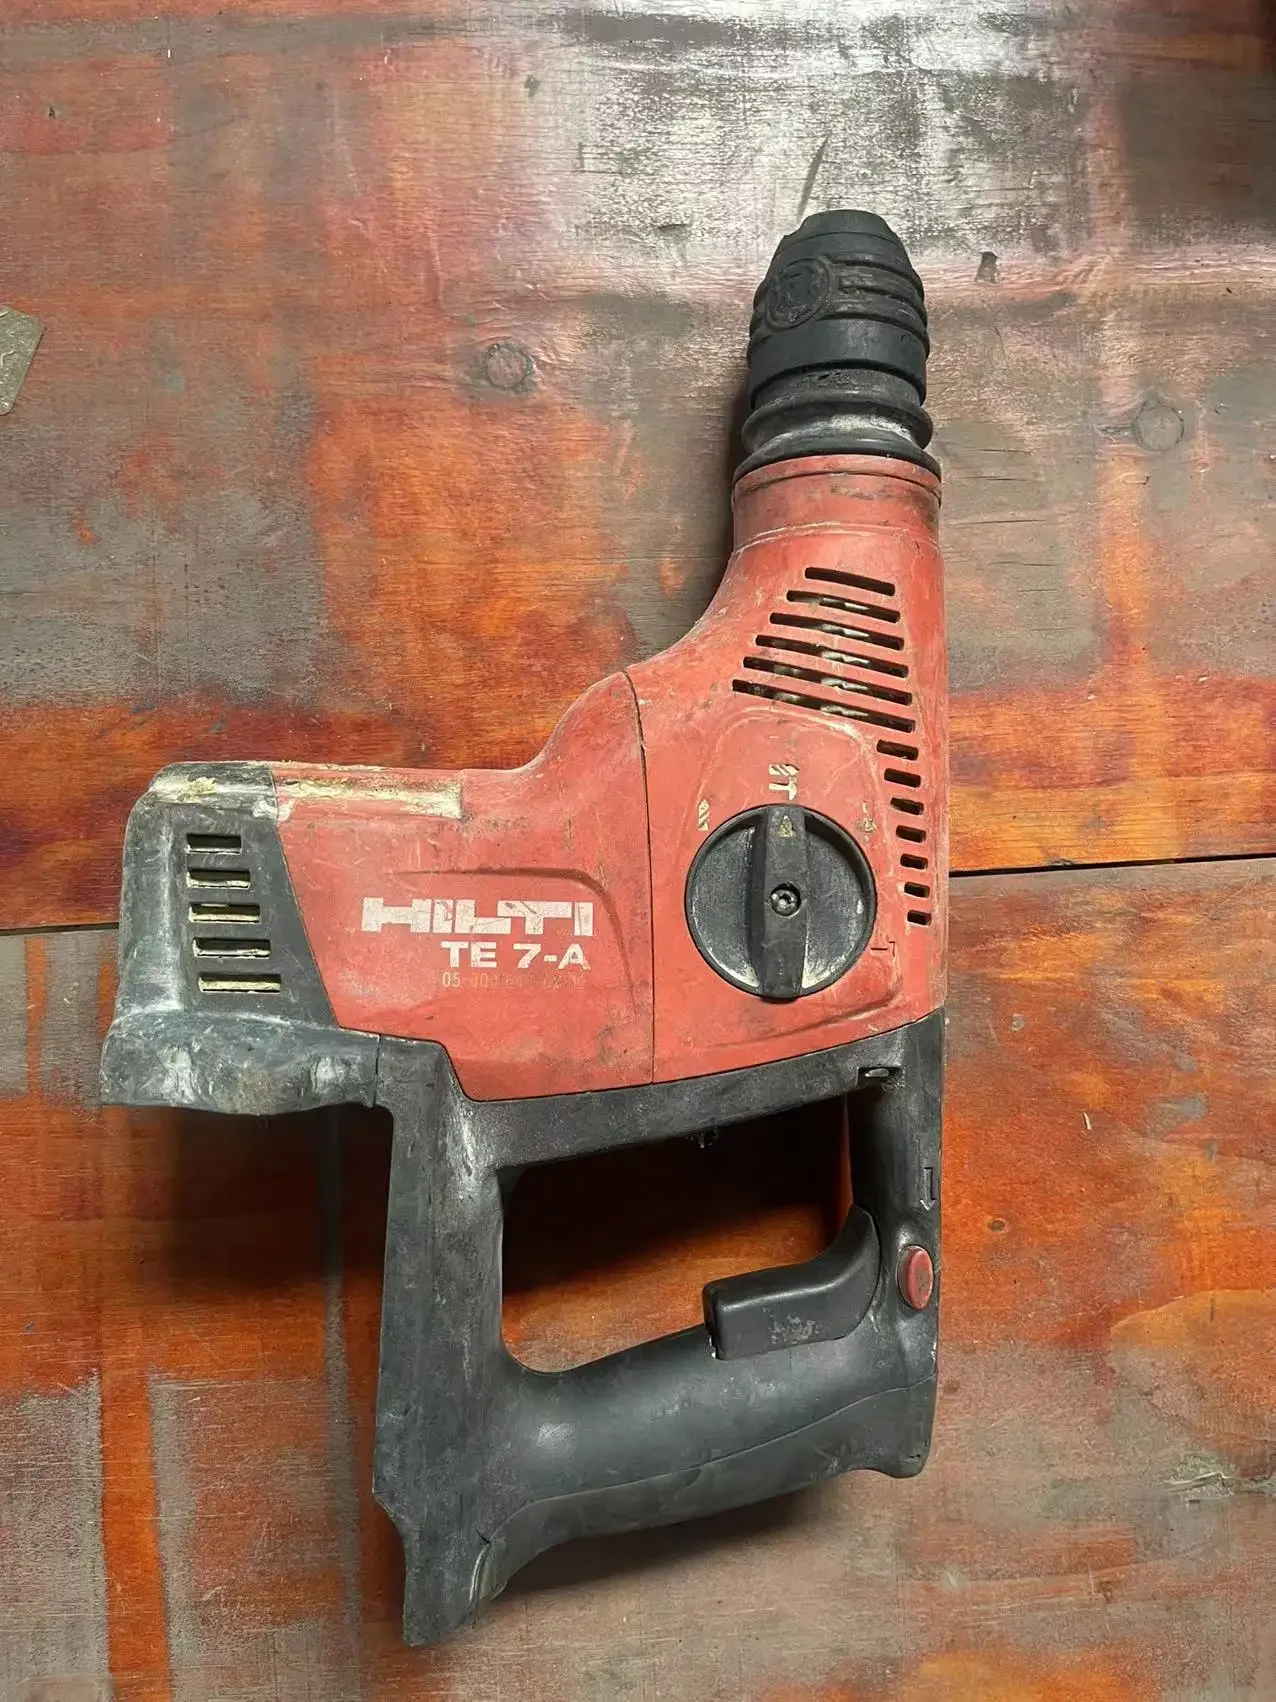 Hilti TE 7-A 36 Heavy Duty HAMMER .USED.SECOND HAND hilti te56 hammer 220v used second hand 1100w